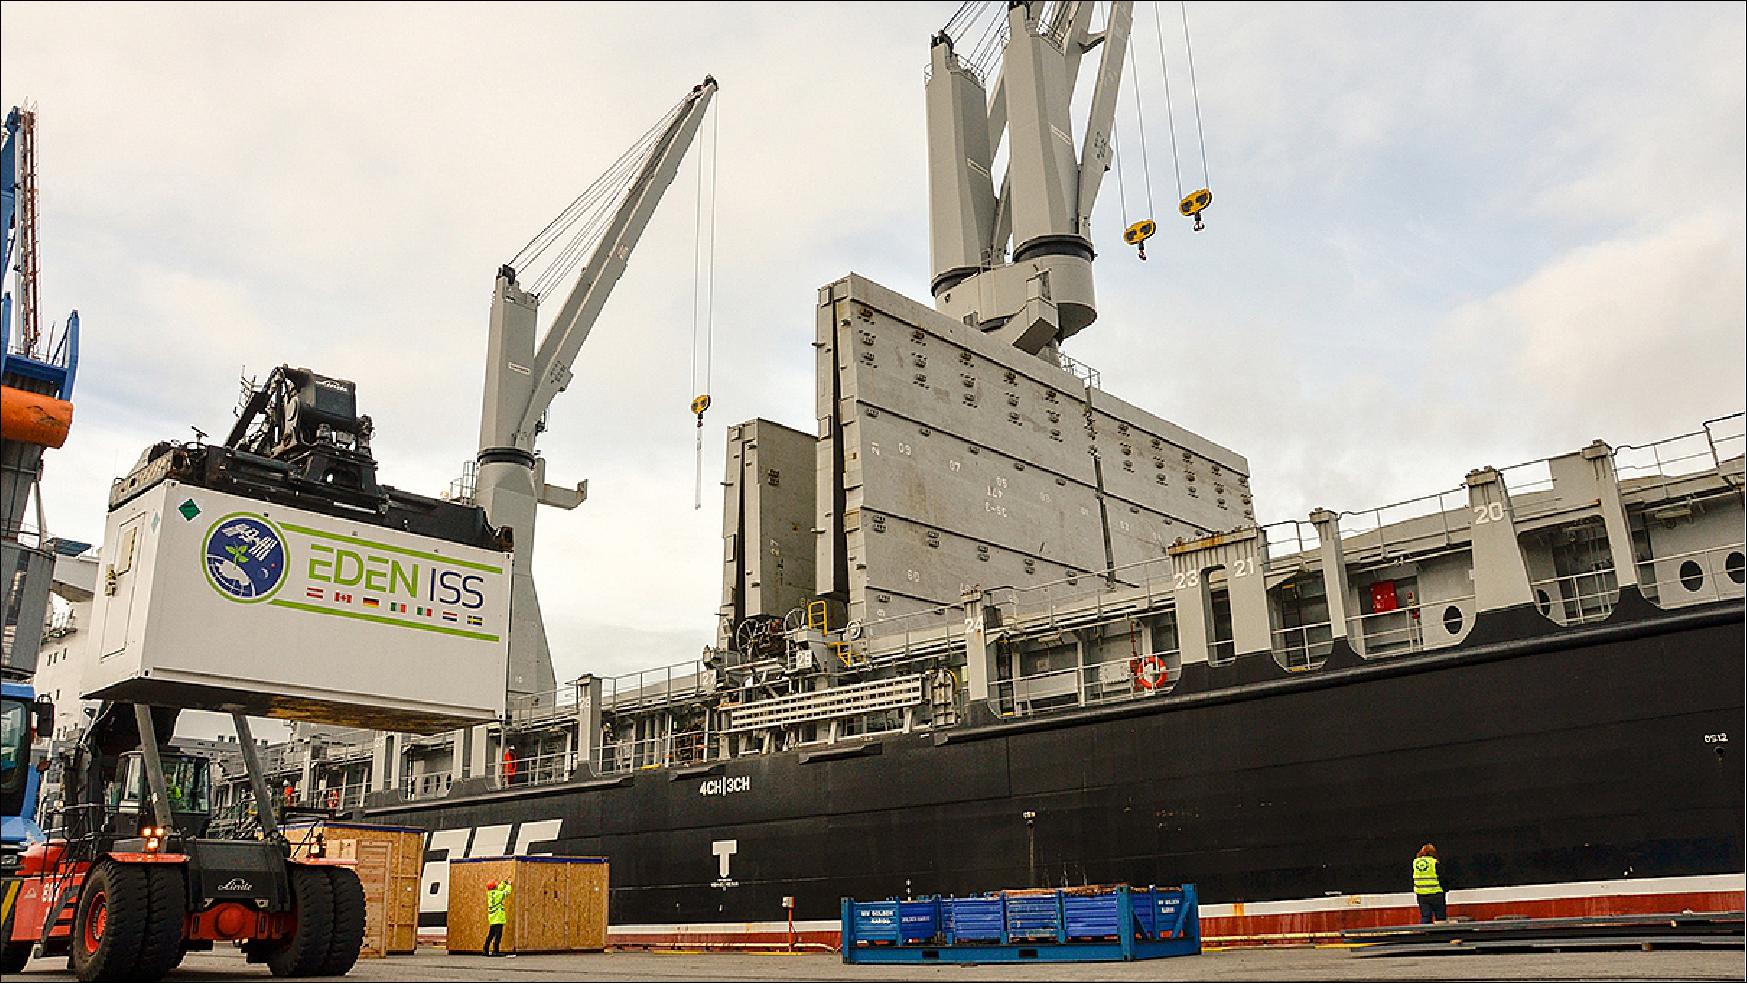 Figure 6: The loading of EDEN ISS at the port of Hamburg onto a commercial ship to Cape Town (image credit: DLR)